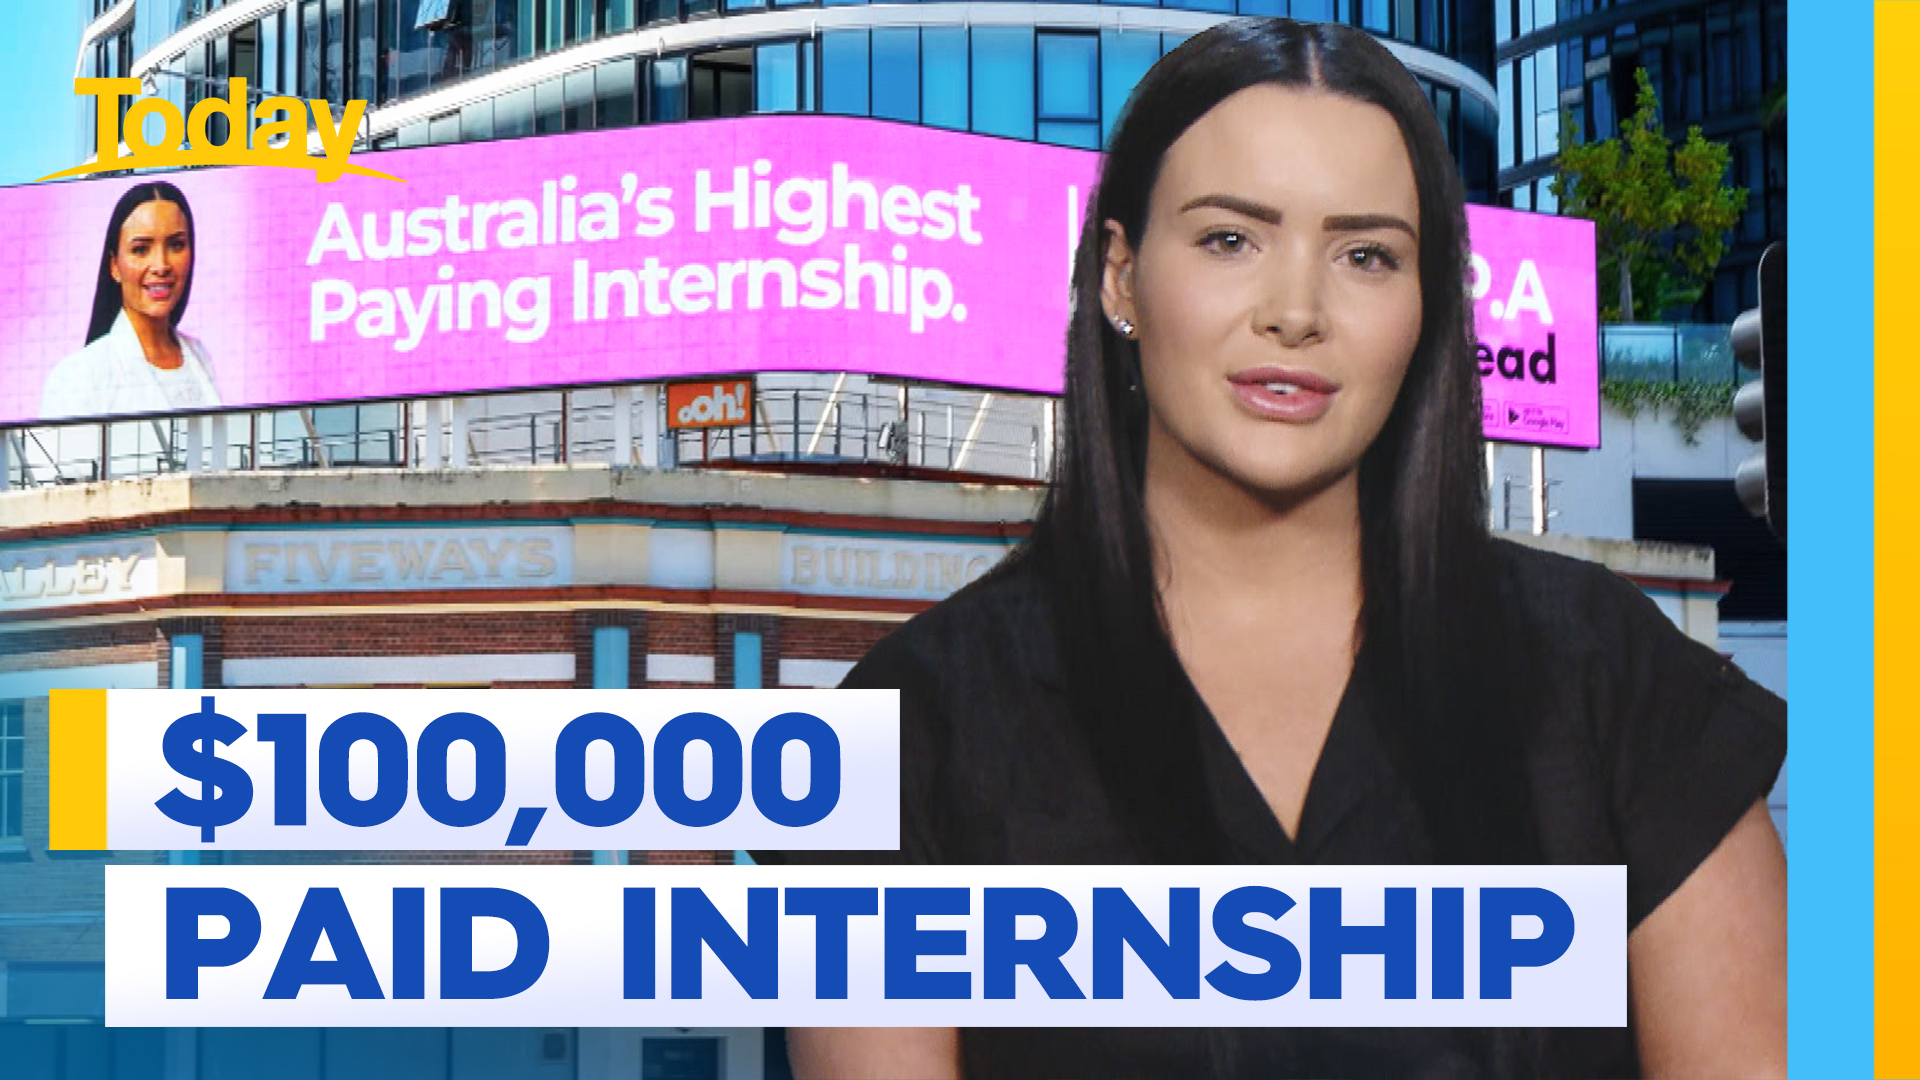 Business offering six-figure salary for a new intern